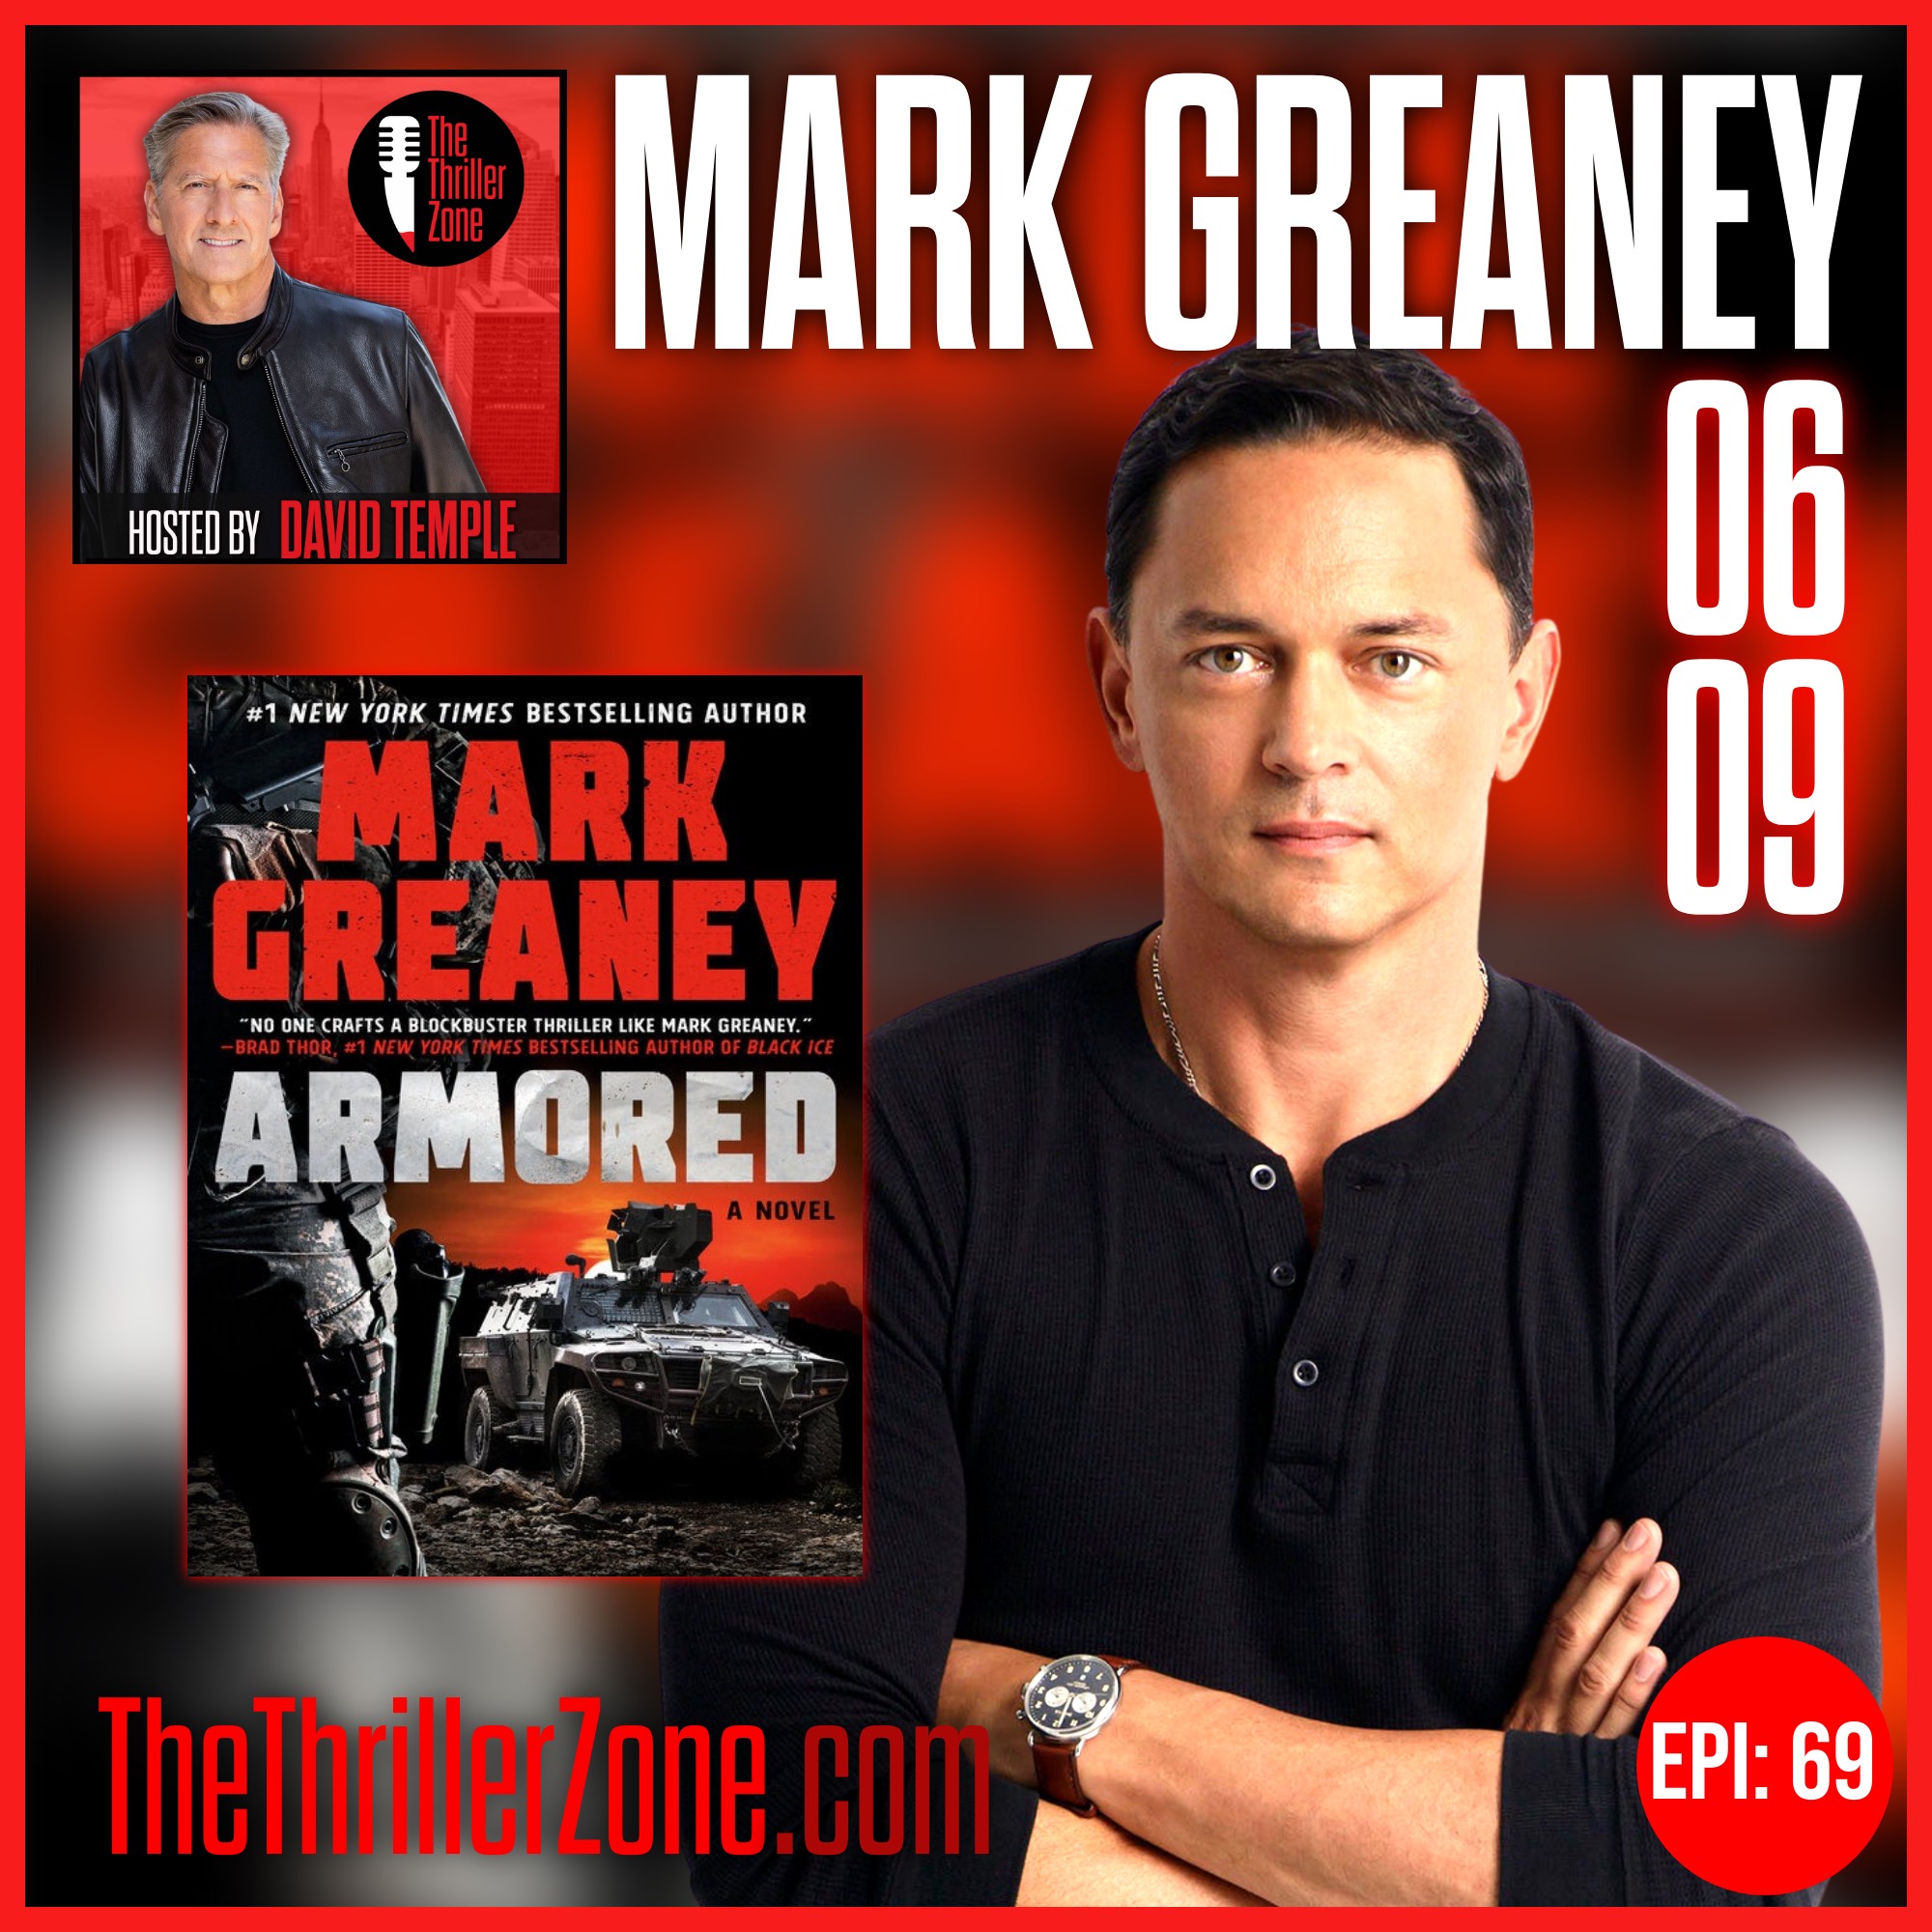 Mark Greaney, Number 1 New York Times Bestselling Author of ARMORED